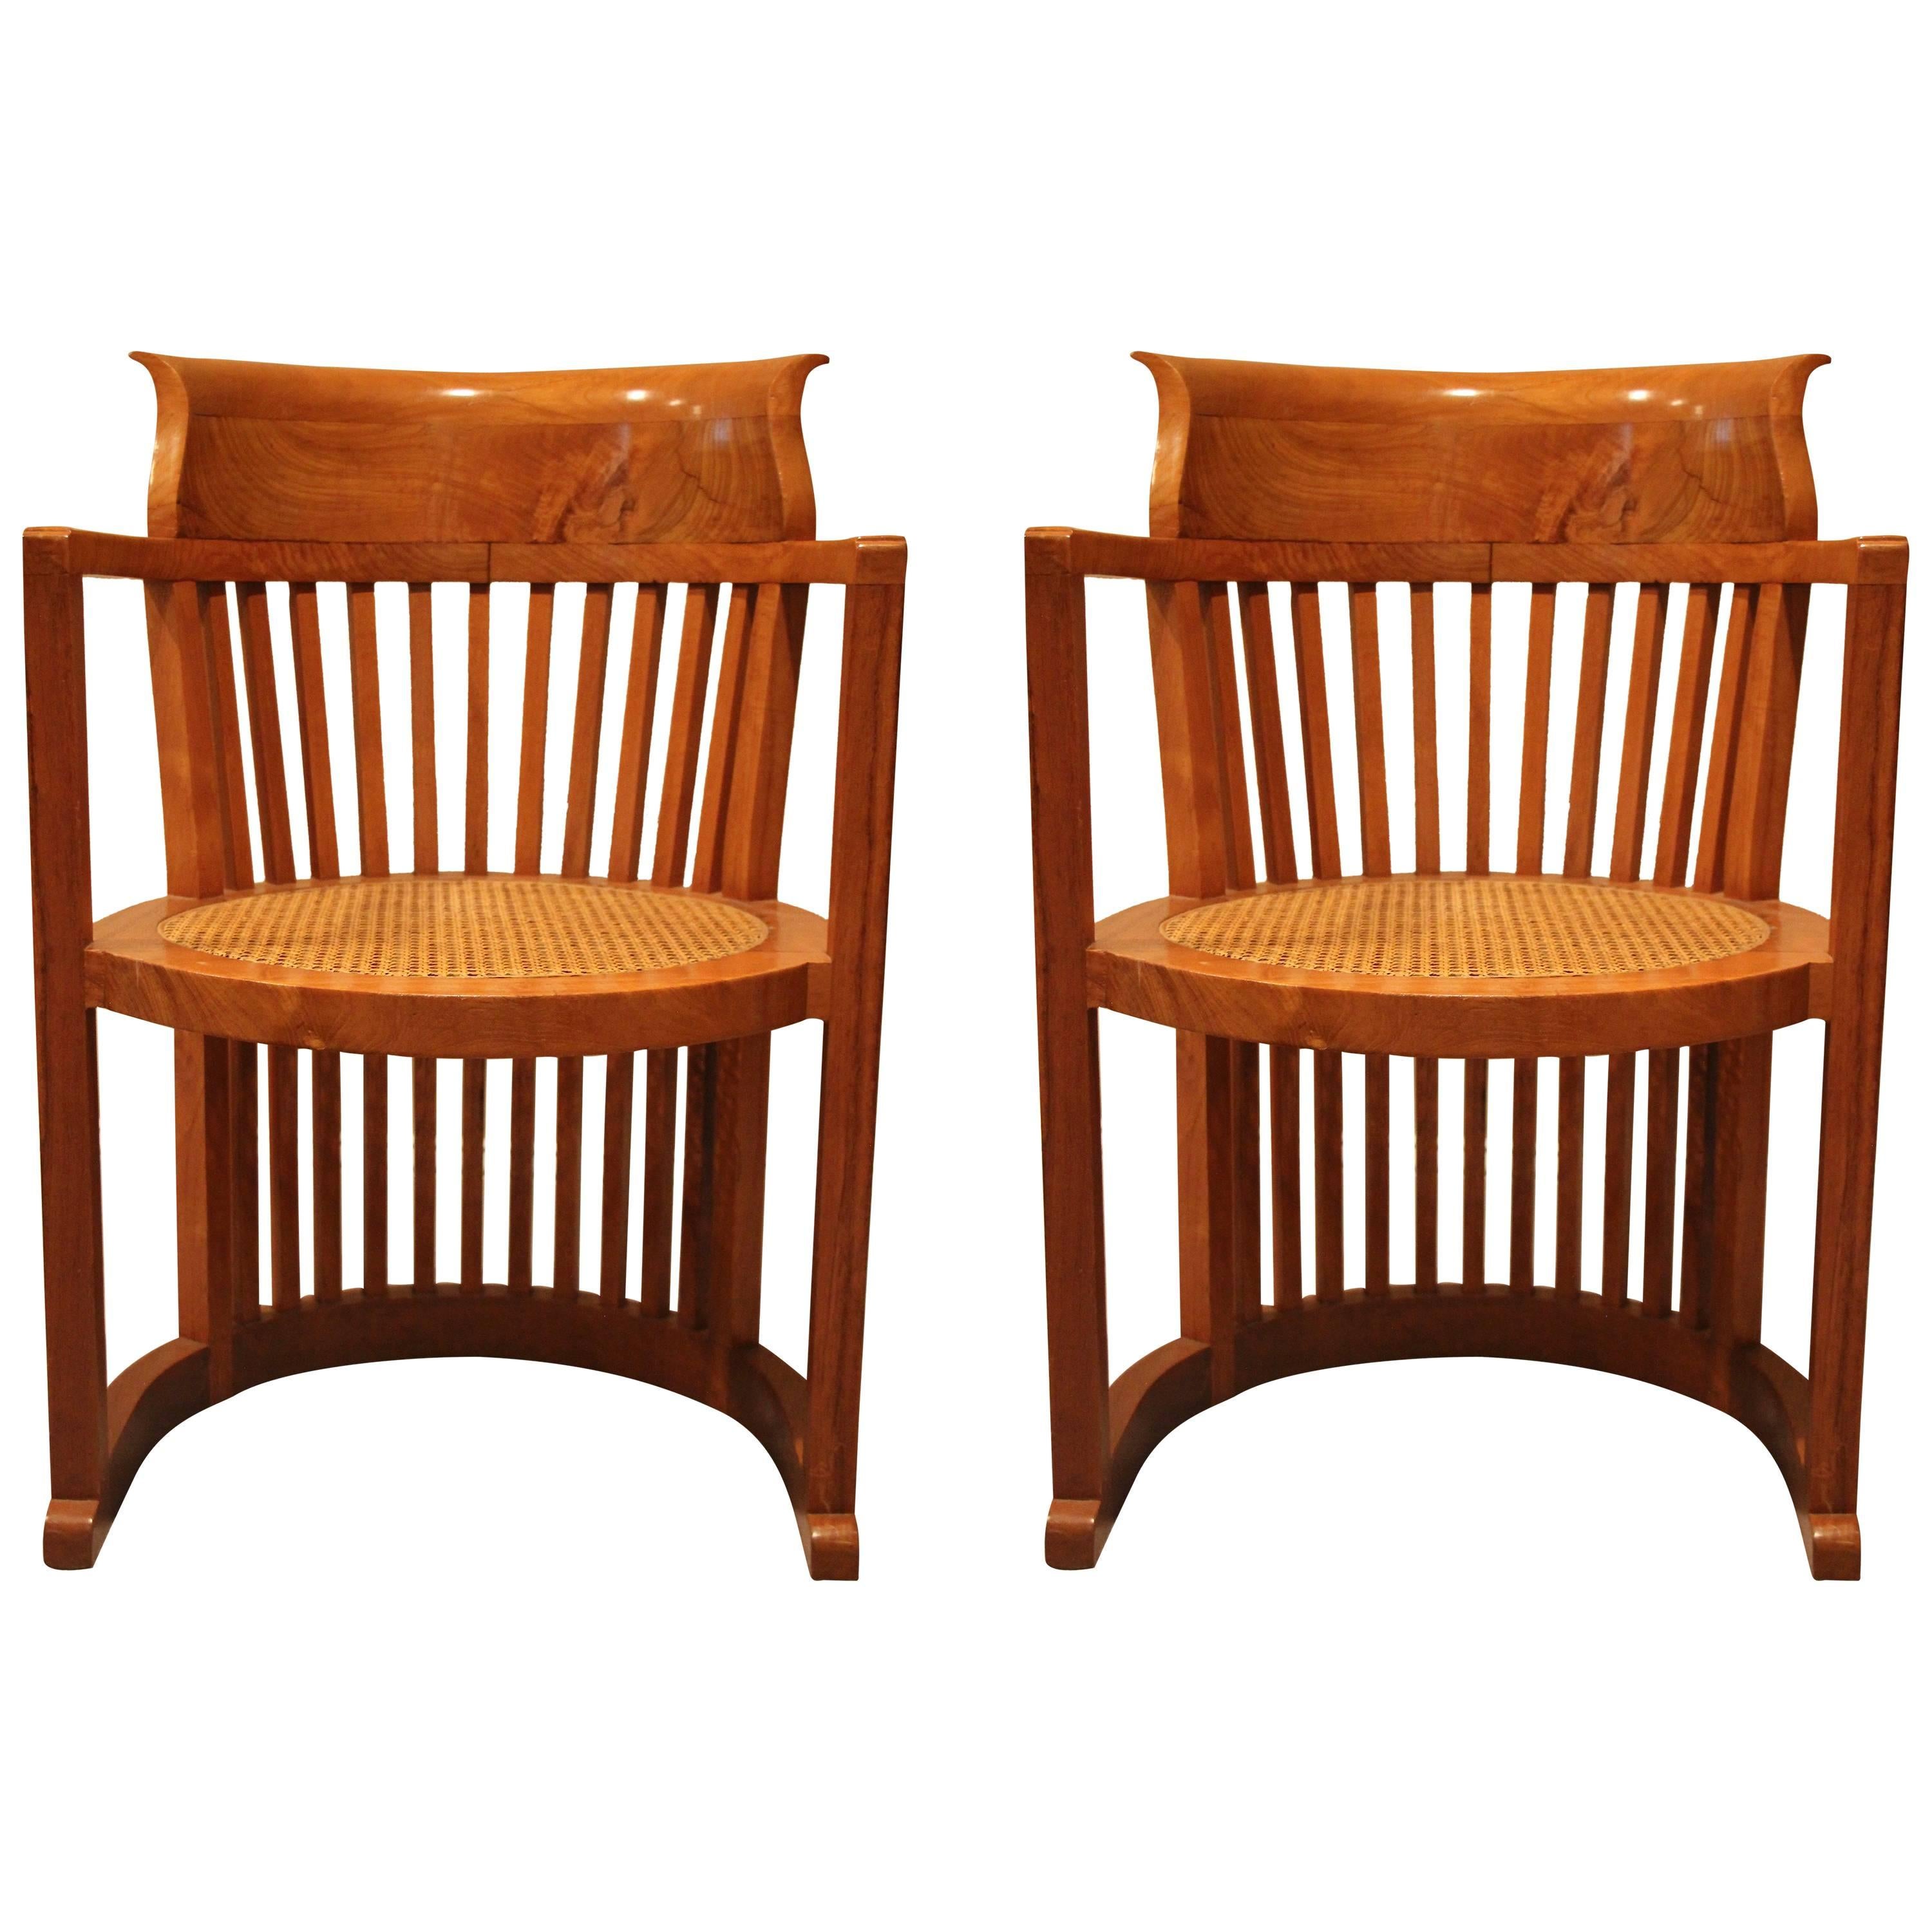 Pair of Frank Lloyd Wright Style Armchairs